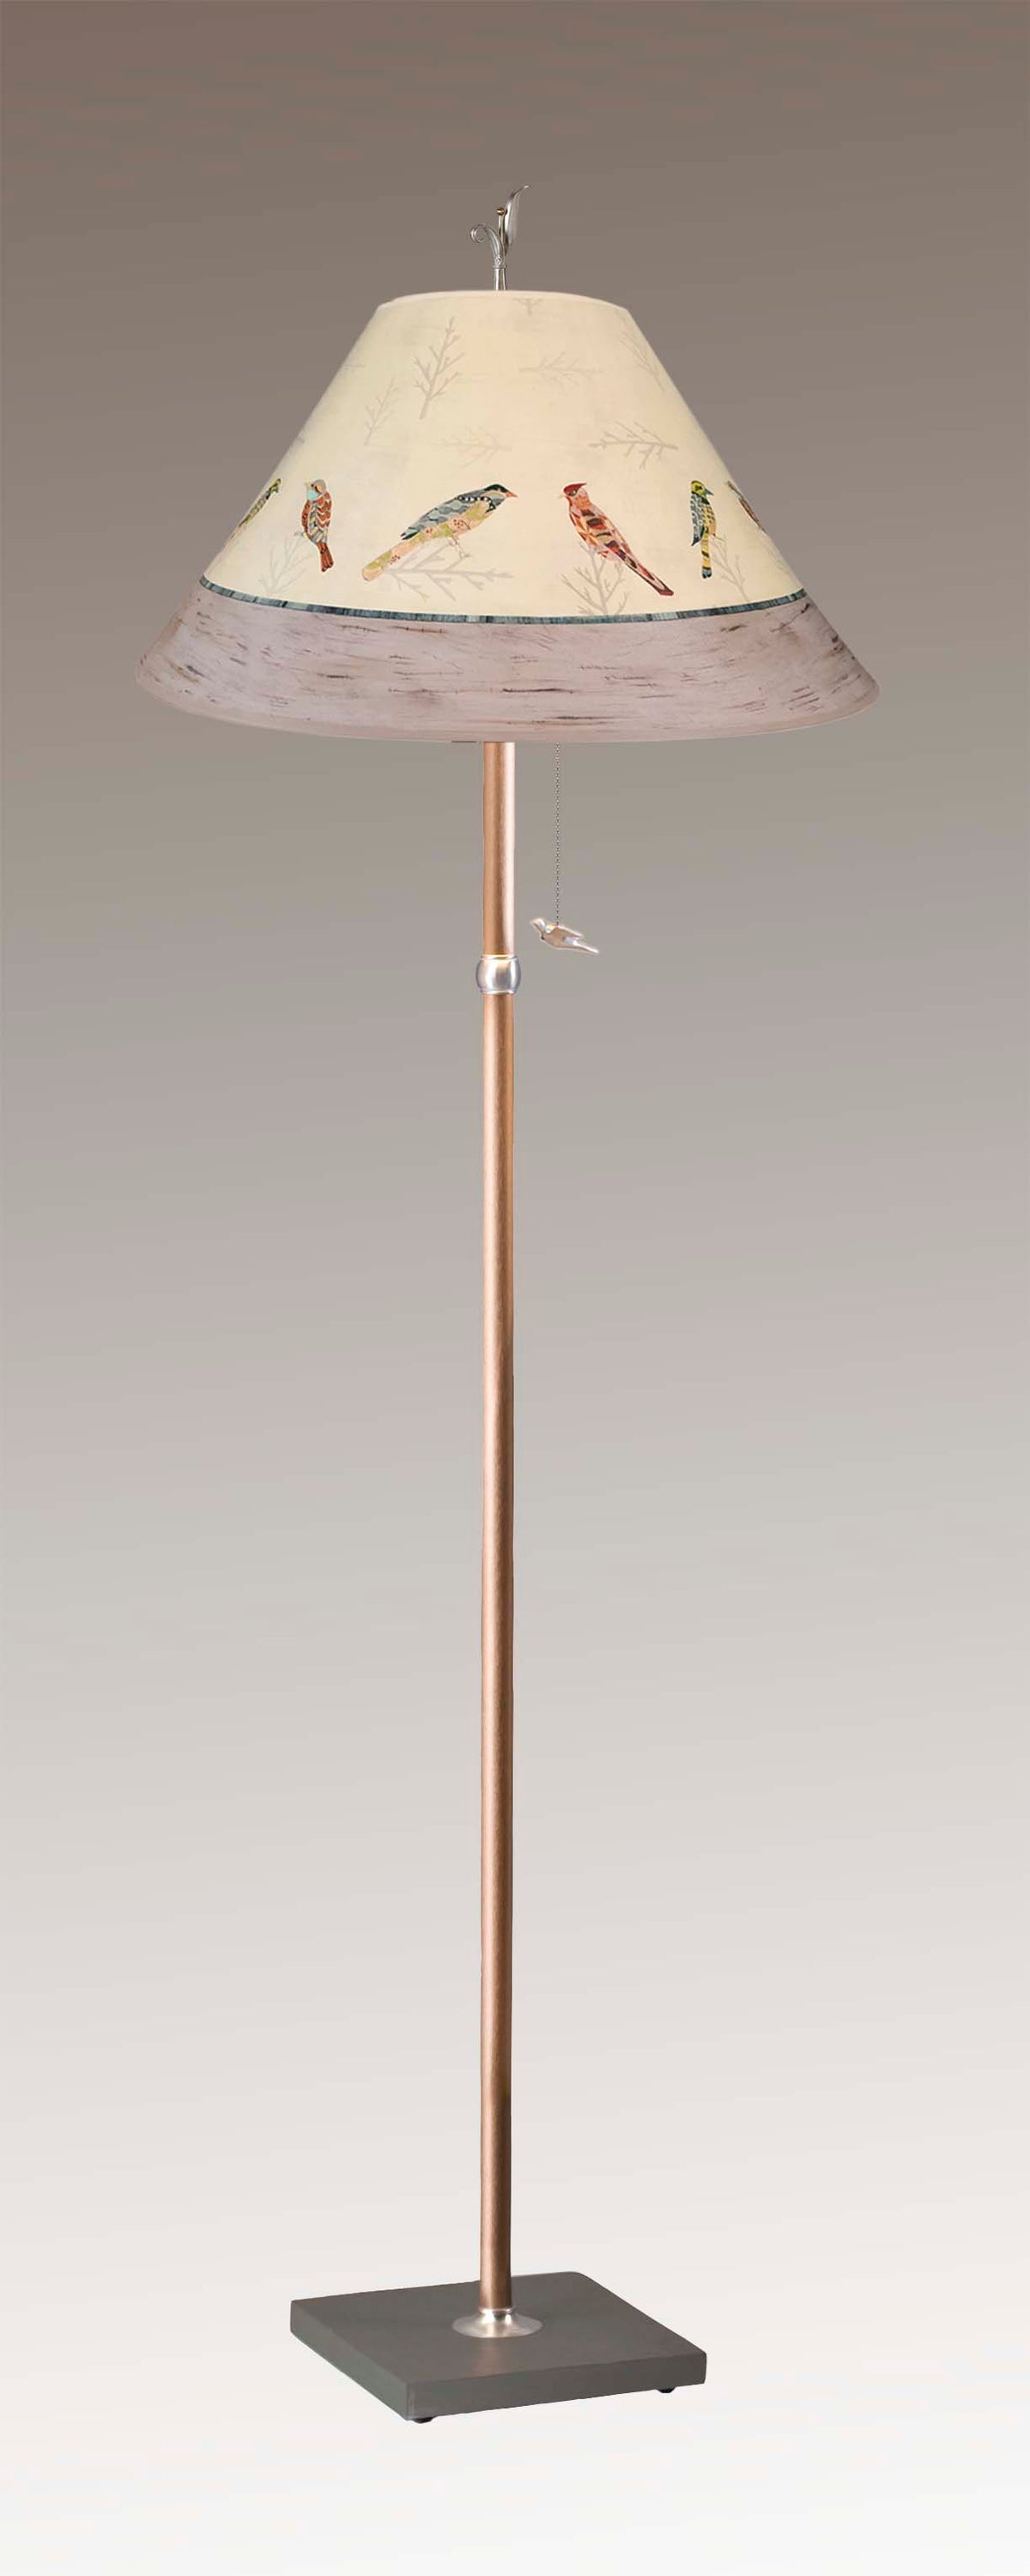 Copper Floor Lamp with Large Conical Shade in Bird Friends